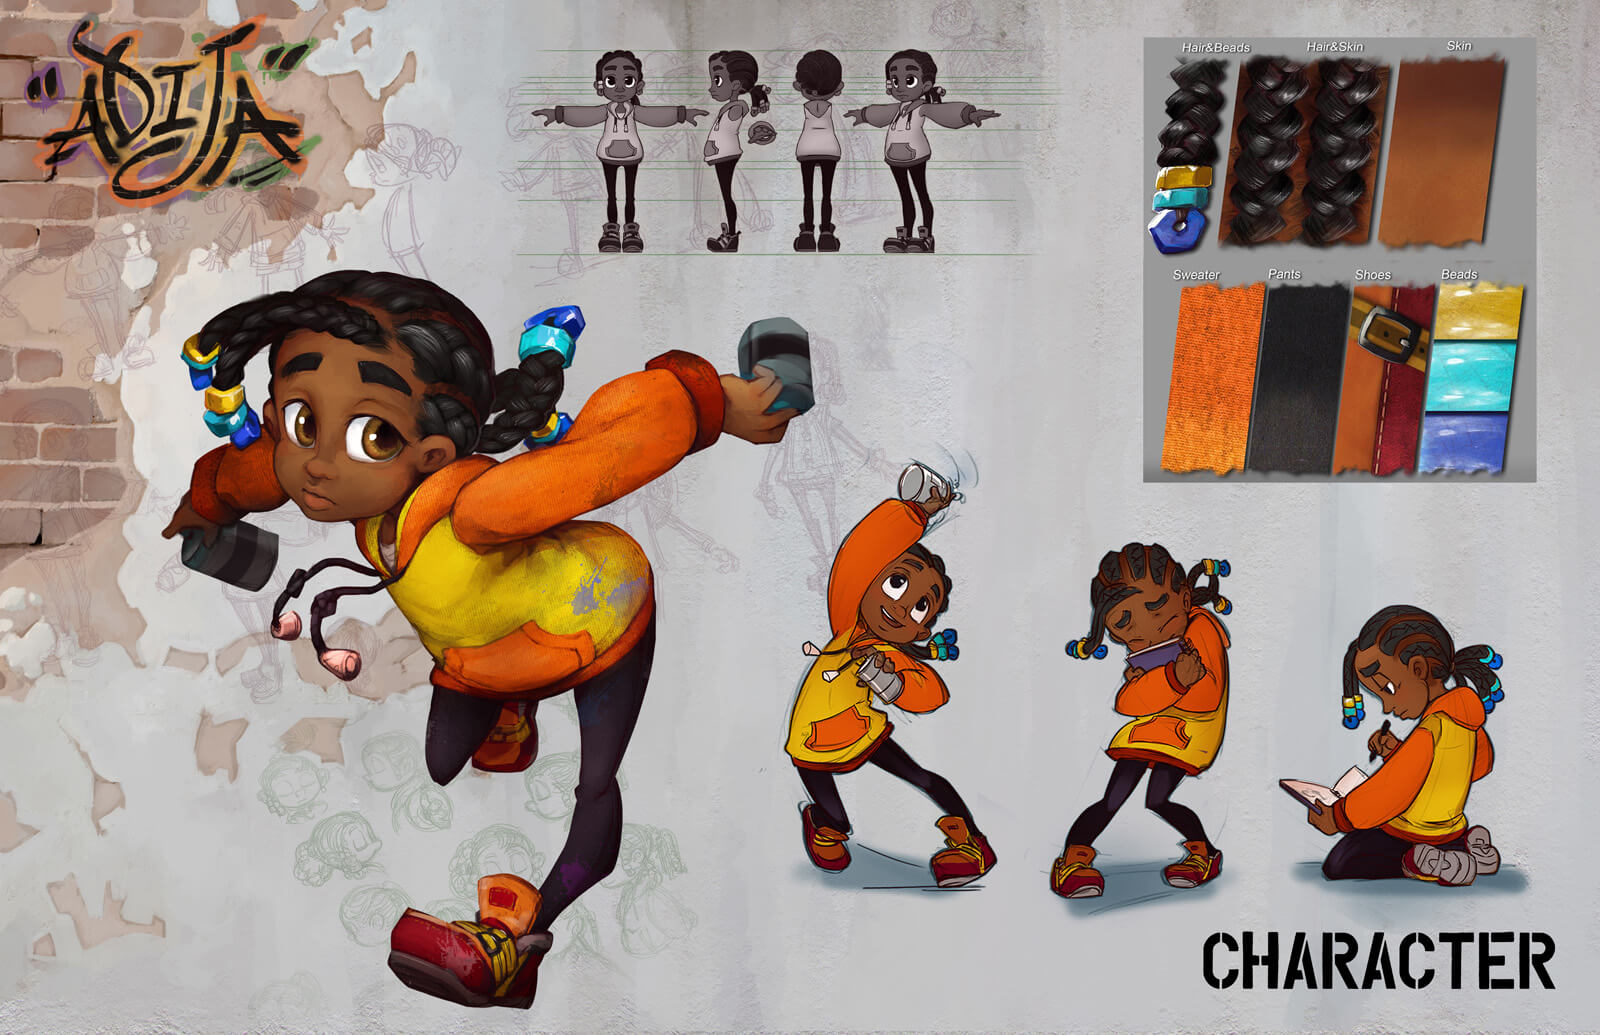 Character design sheet for the film Adija, showing several versions of the young protagonist and detail of her apparel